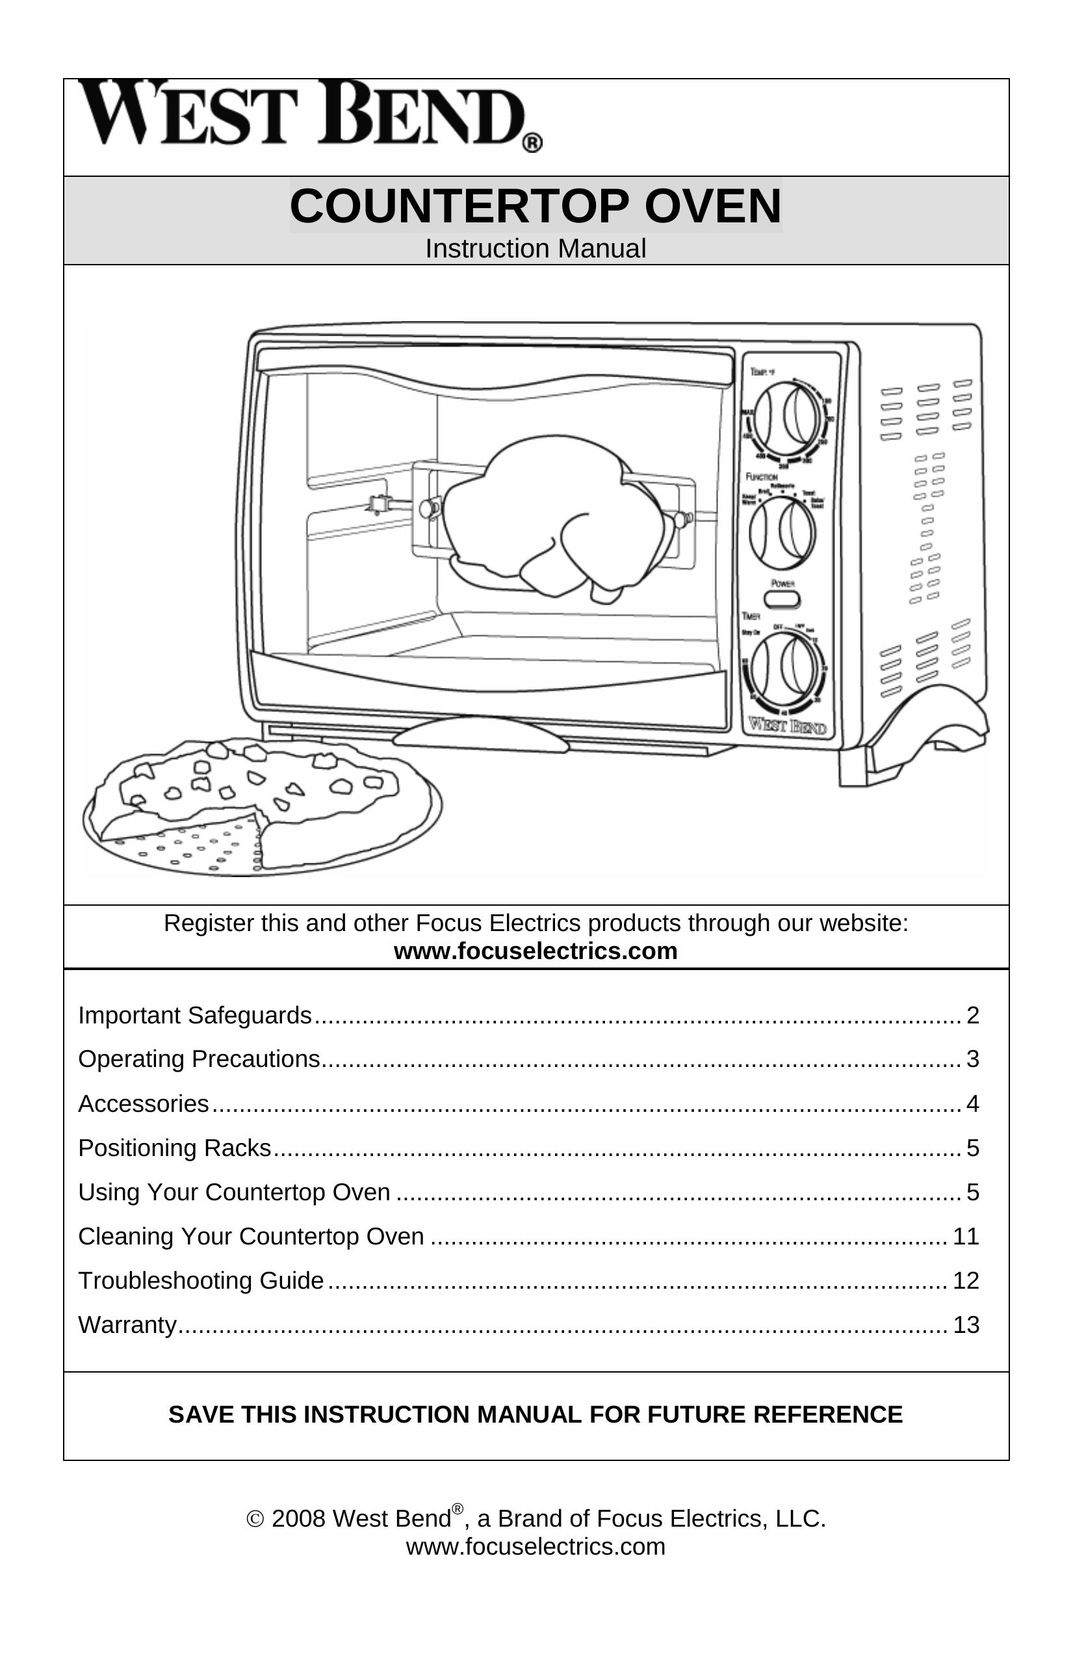 West Bend L5658B Oven User Manual